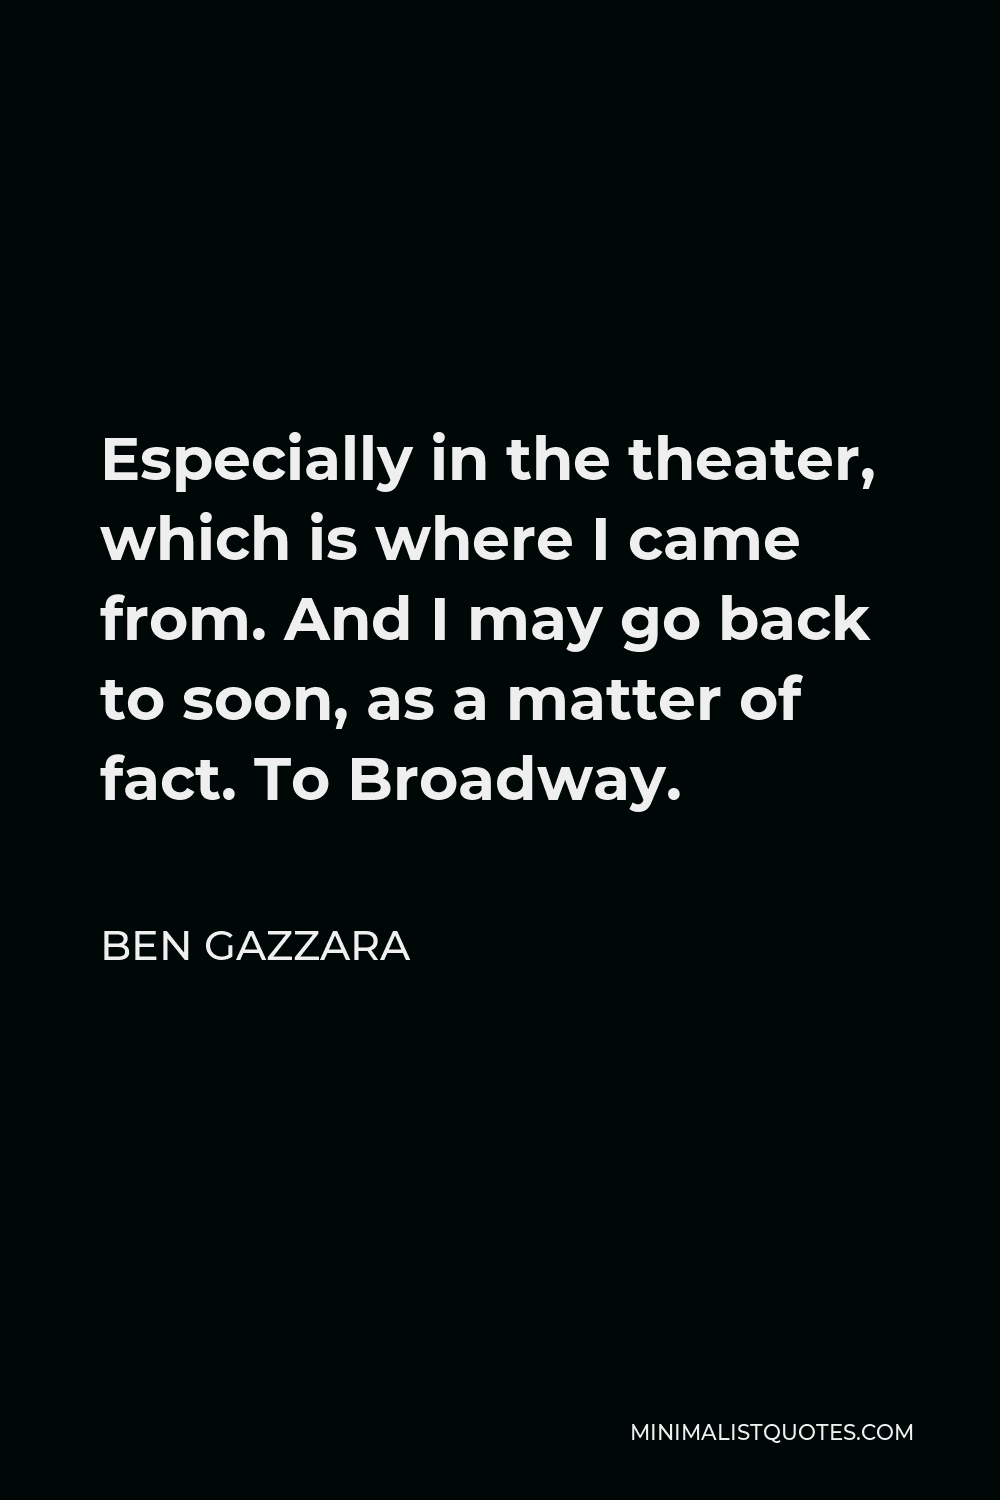 Ben Gazzara Quote - Especially in the theater, which is where I came from. And I may go back to soon, as a matter of fact. To Broadway.